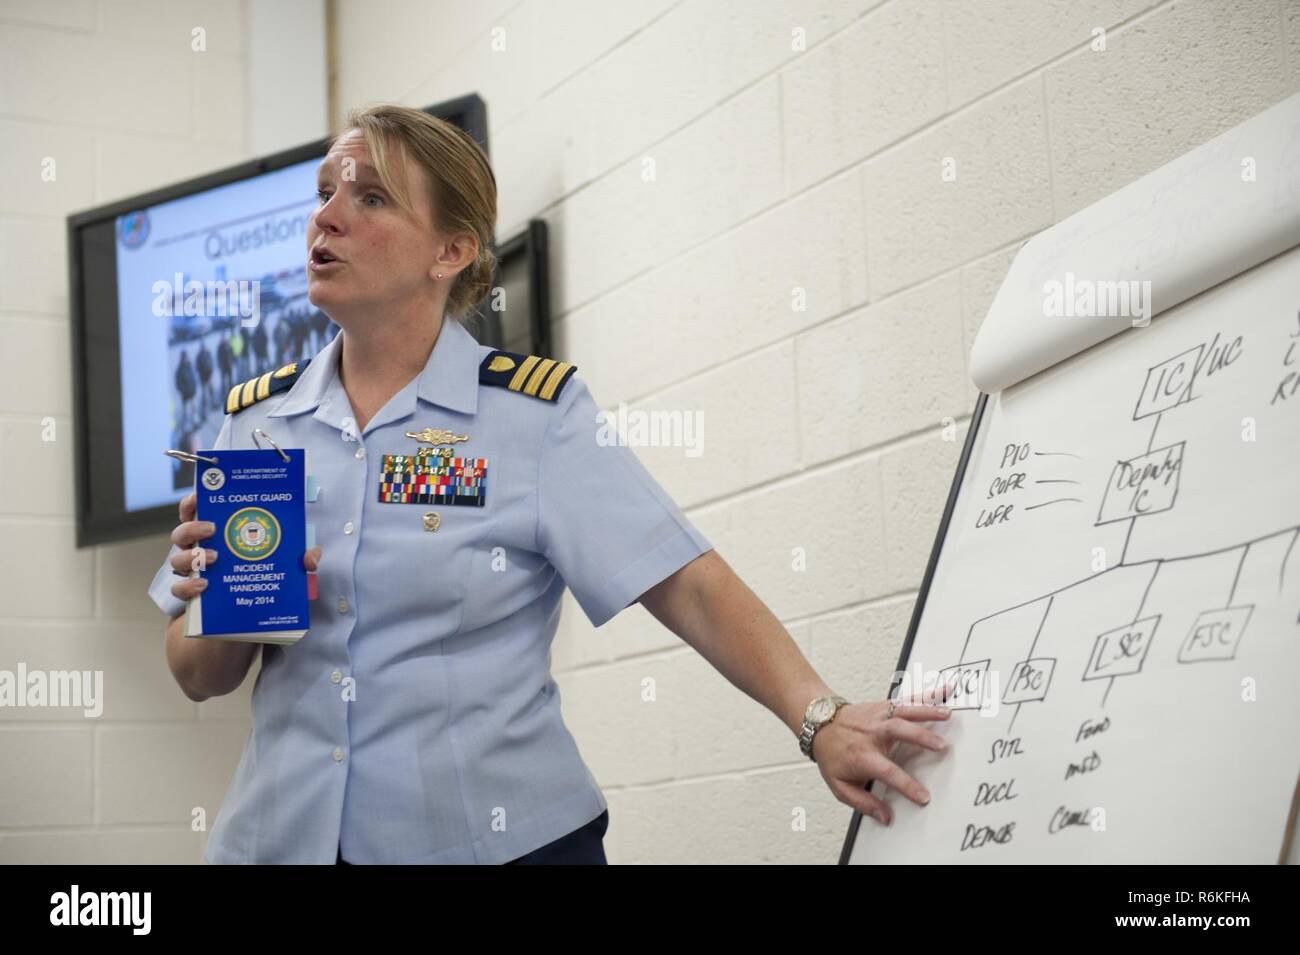 Coast Guard Cdr. Peggy Britton, response chief of Sector Hampton Roads in Portsmouth, Virginia, explains the Incident Command System to students from Queensland University of Technology in Brisbane, Queensland, Australia, at sector May 25, 2017.The students are pursuing master's degrees in complex program leadership and visited Sector Hampton Roads to learn about the Coast Guard's structure and interagency strategies. Stock Photo